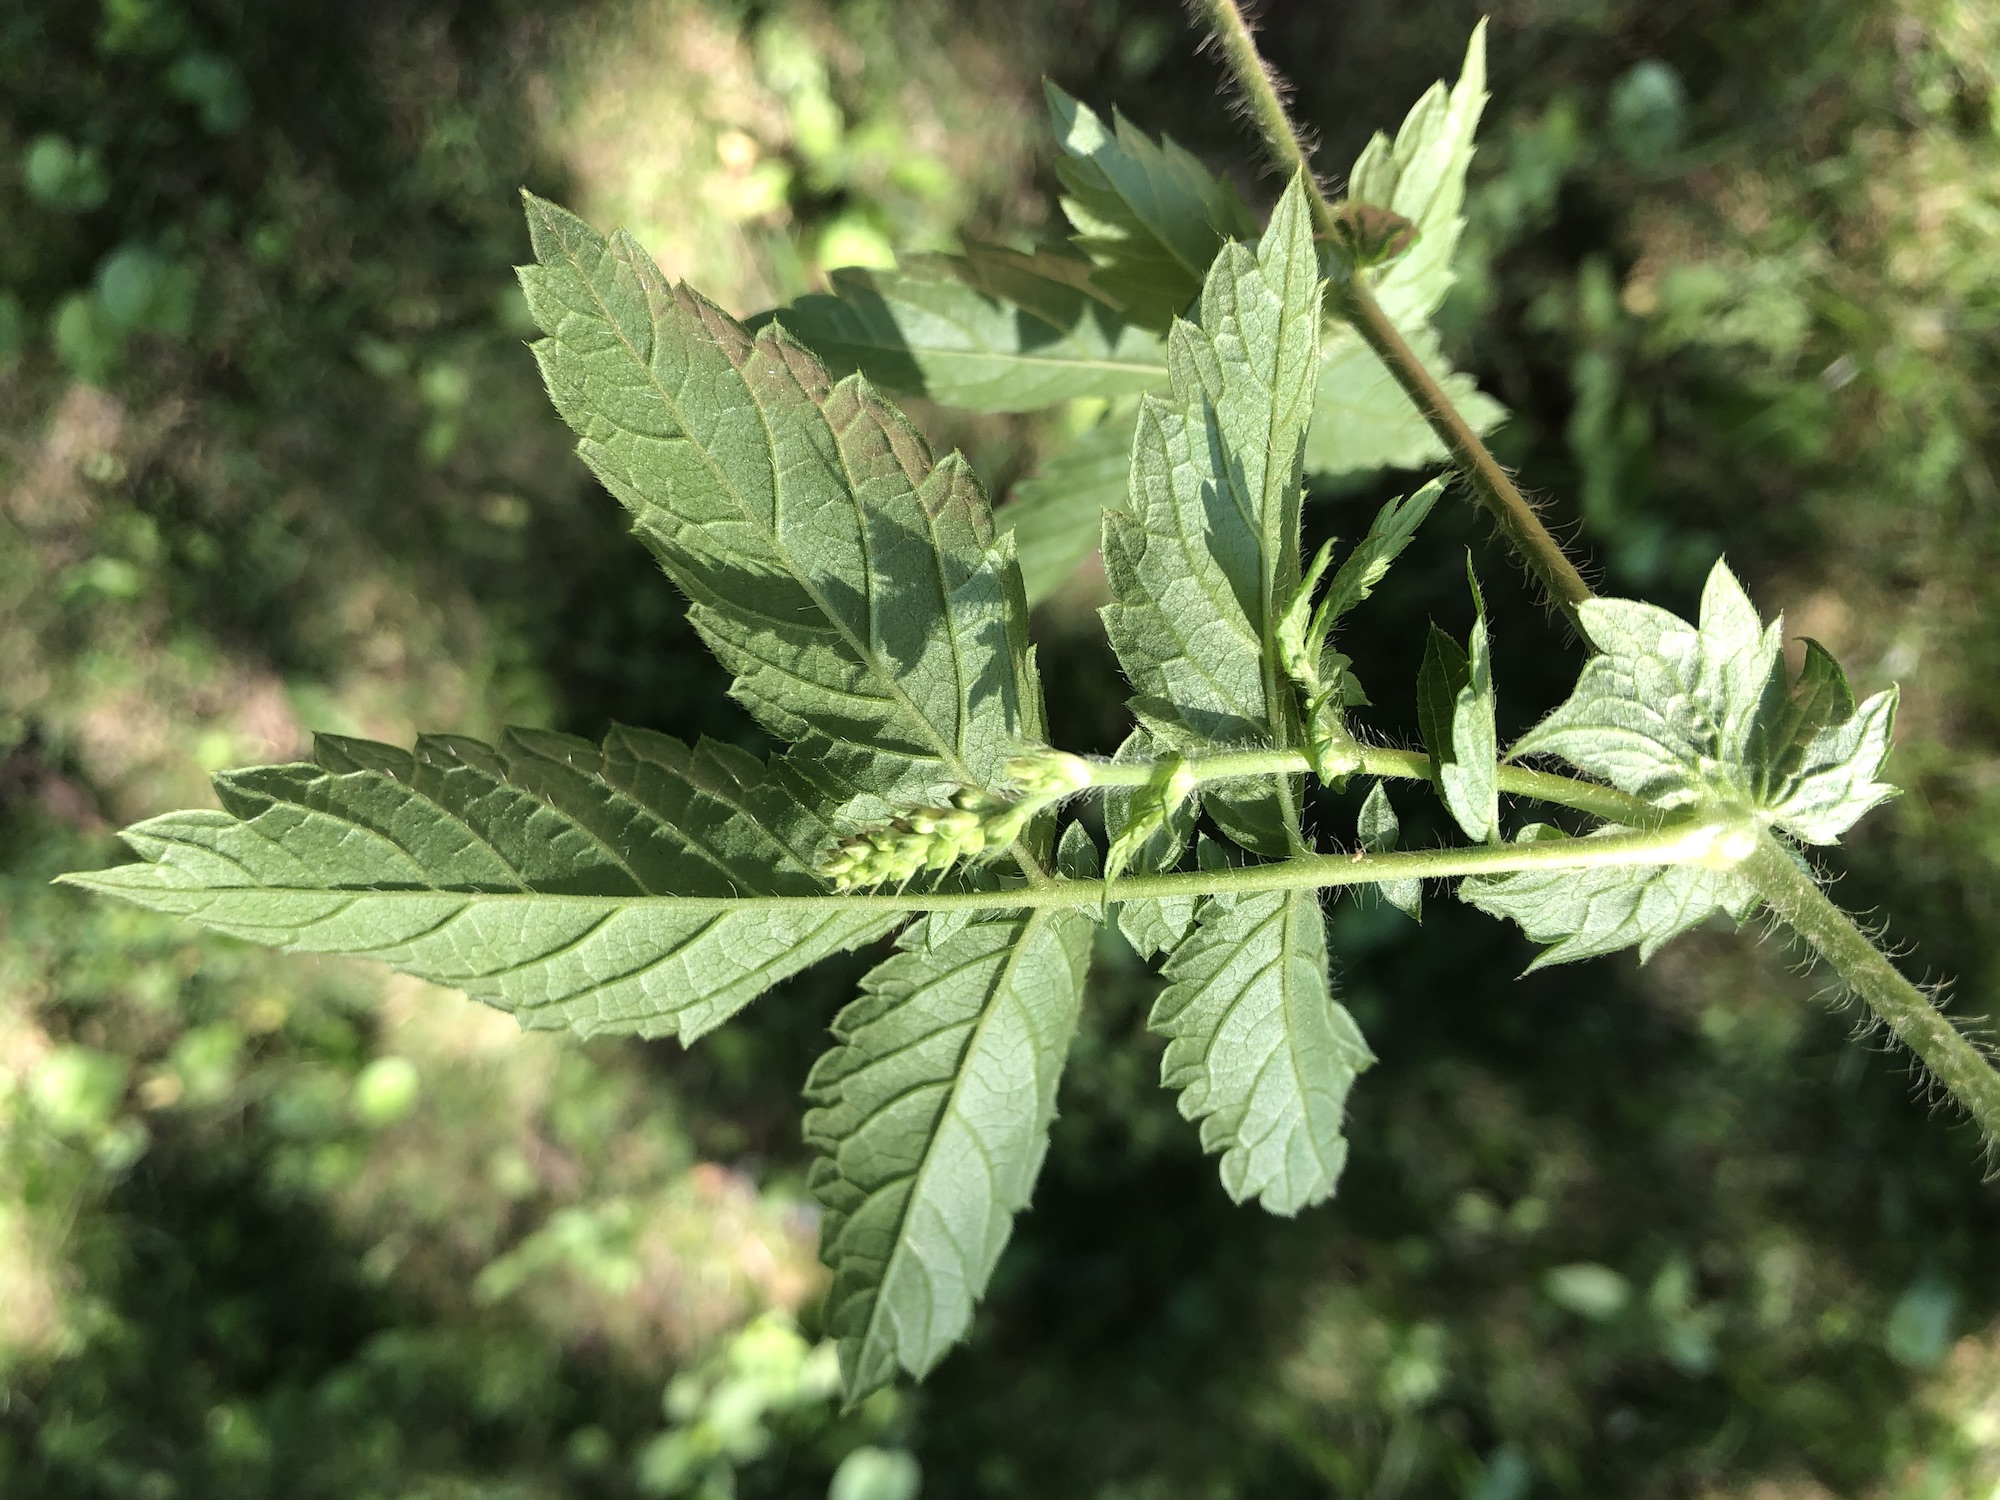 Tall Hairy Agrimony leaf backside at edge of Nakoma Park natural area in Madison, Wisconsin on July 13, 2022.